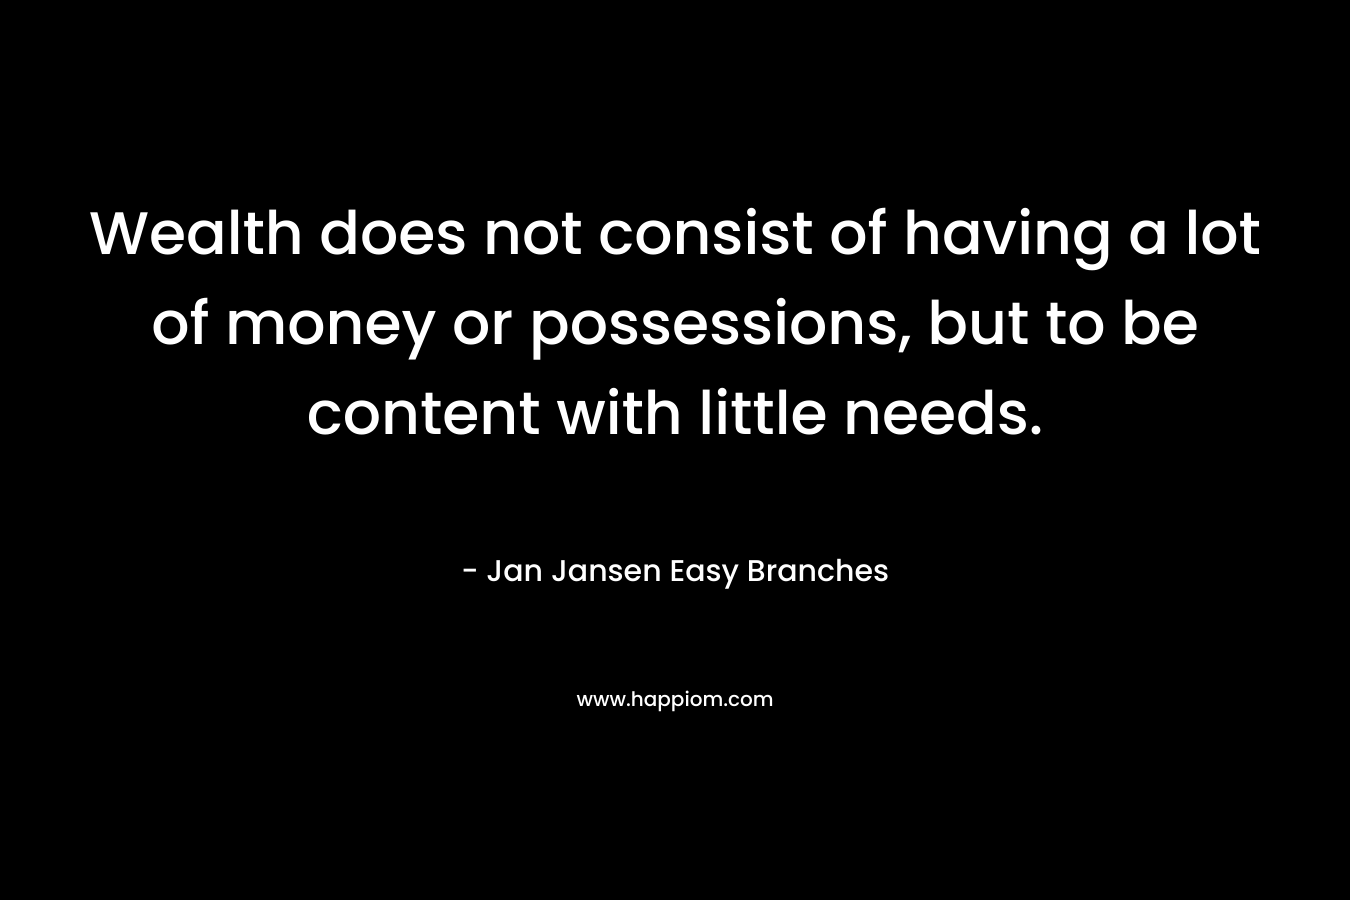 Wealth does not consist of having a lot of money or possessions, but to be content with little needs.